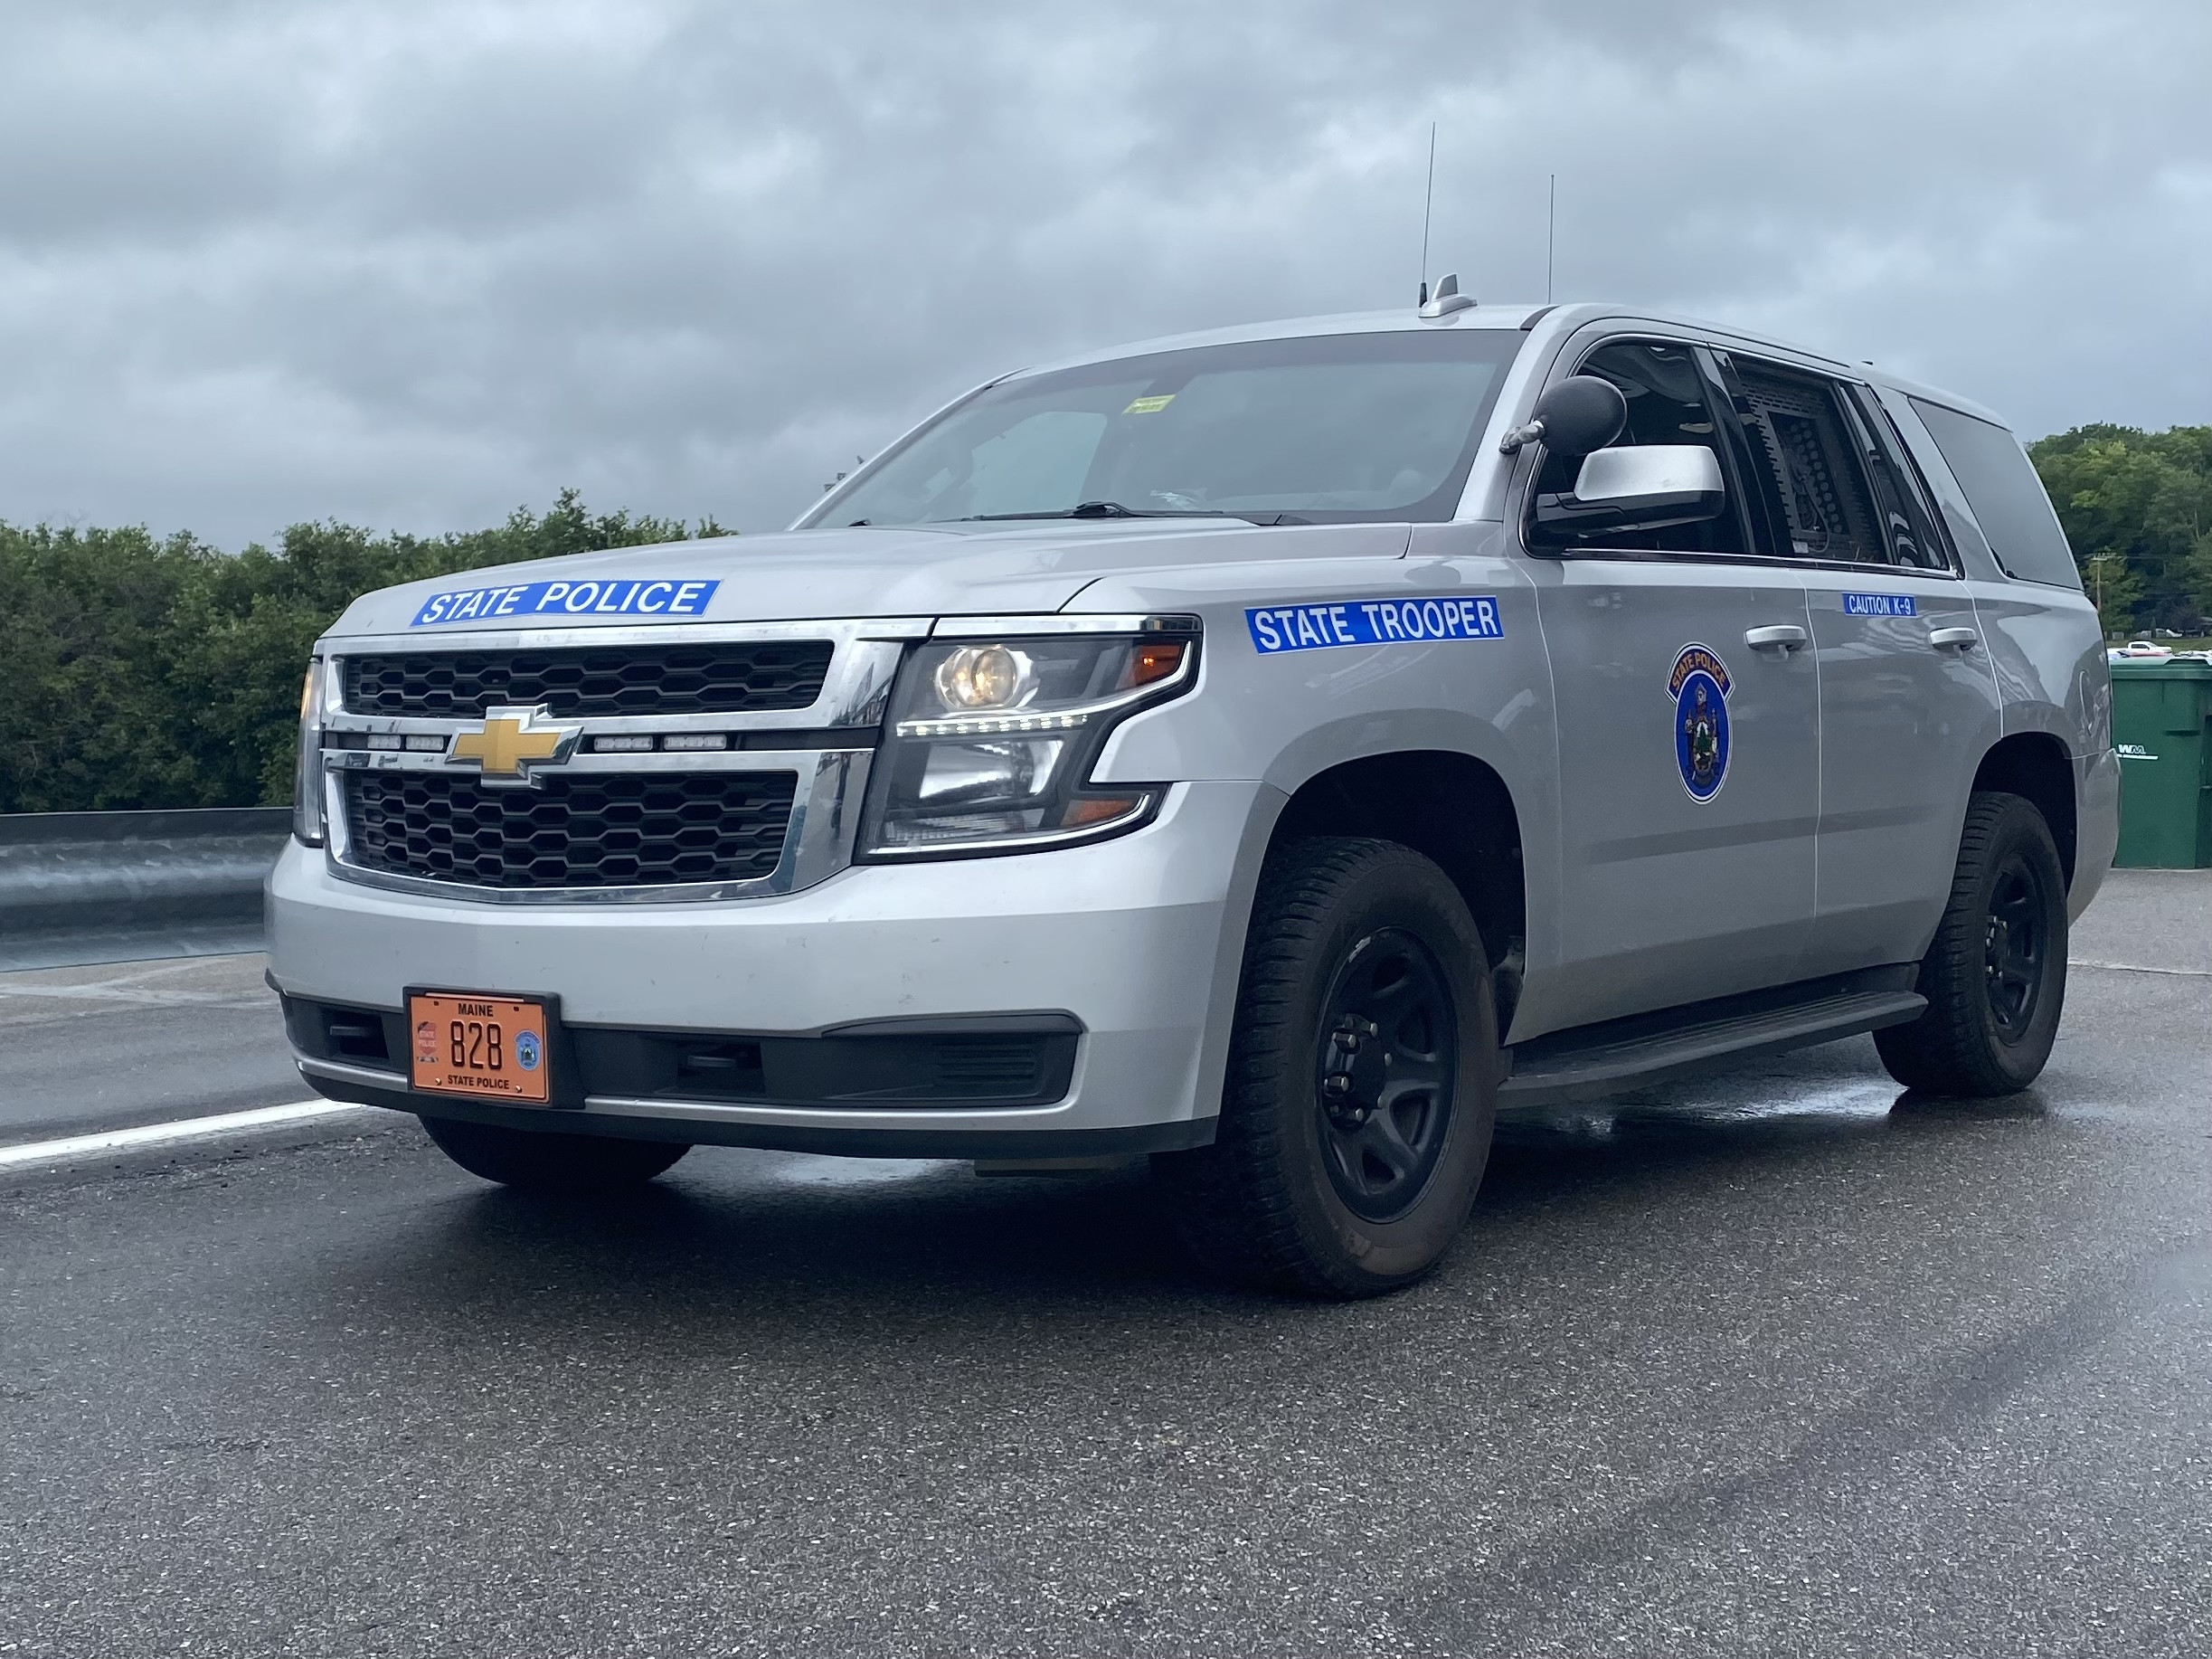 A photo  of Maine State Police
            Cruiser 828, a 2015-2019 Chevrolet Tahoe             taken by @riemergencyvehicles